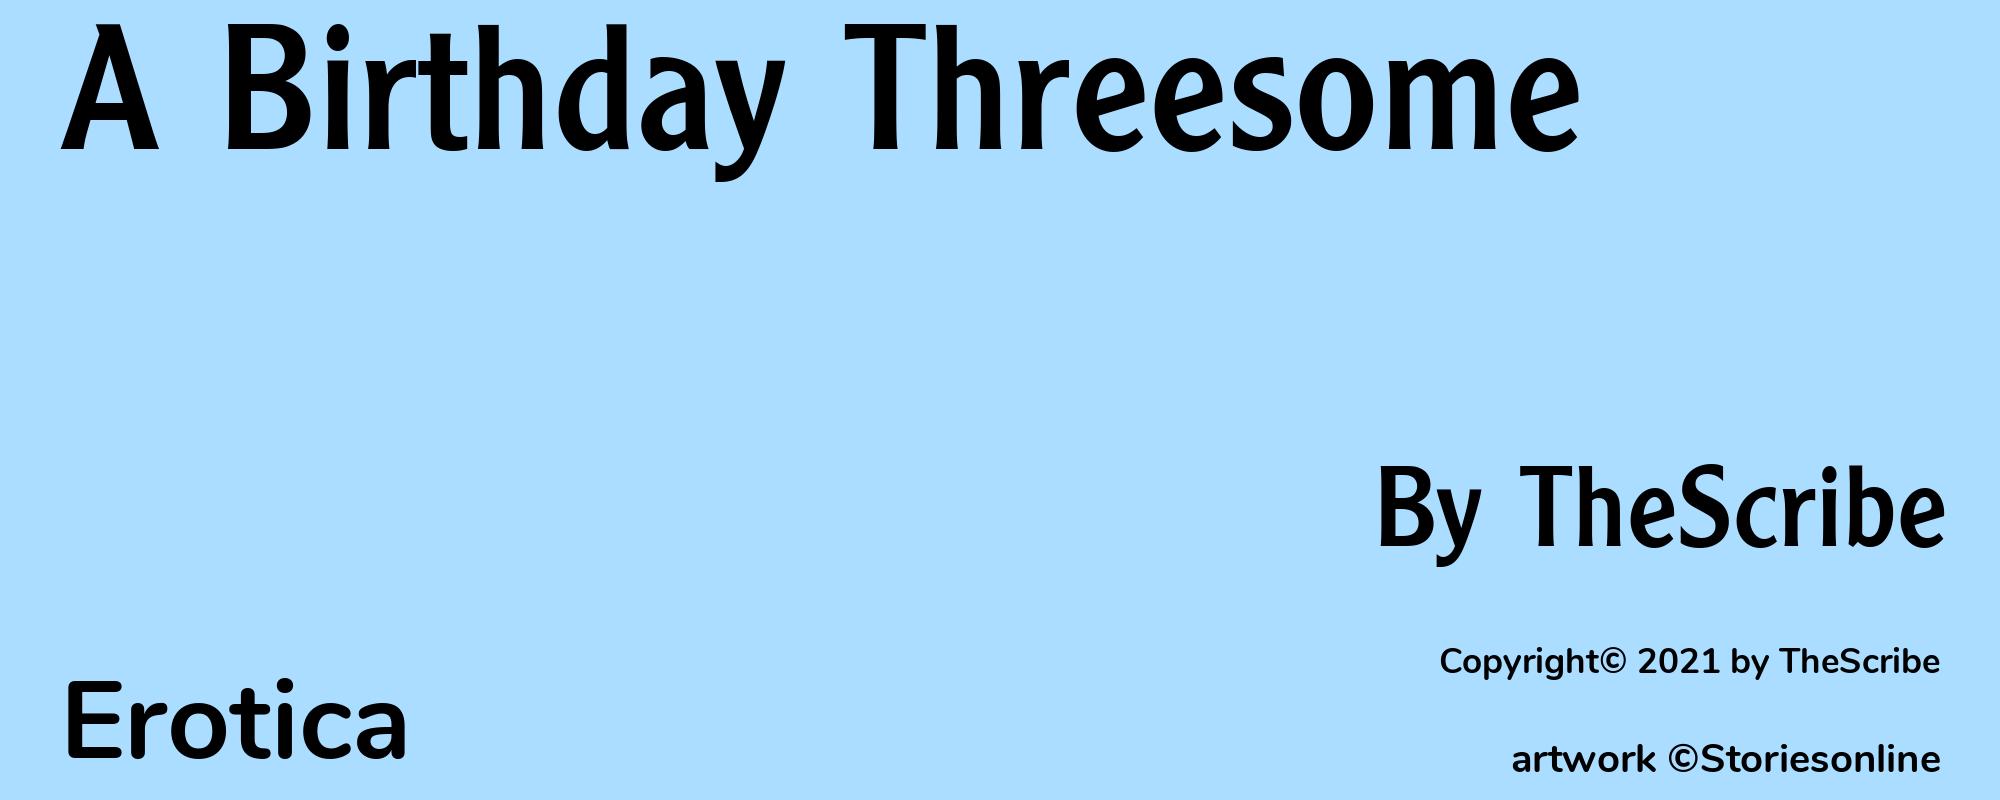 A Birthday Threesome - Cover